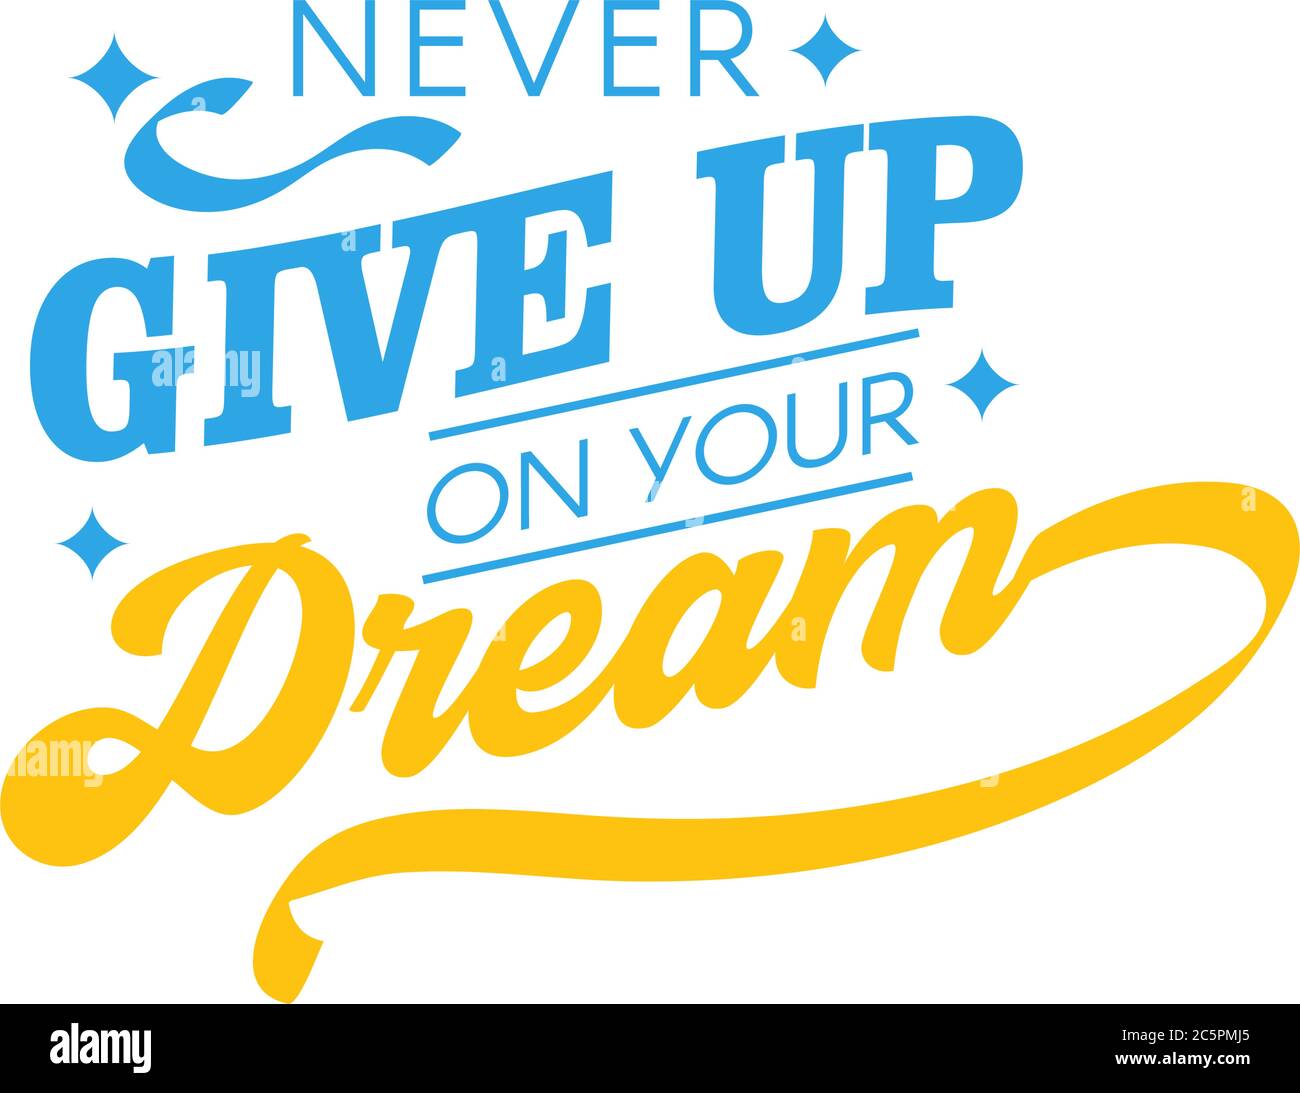 Never give up on your dream motivational quote typography Stock Vector